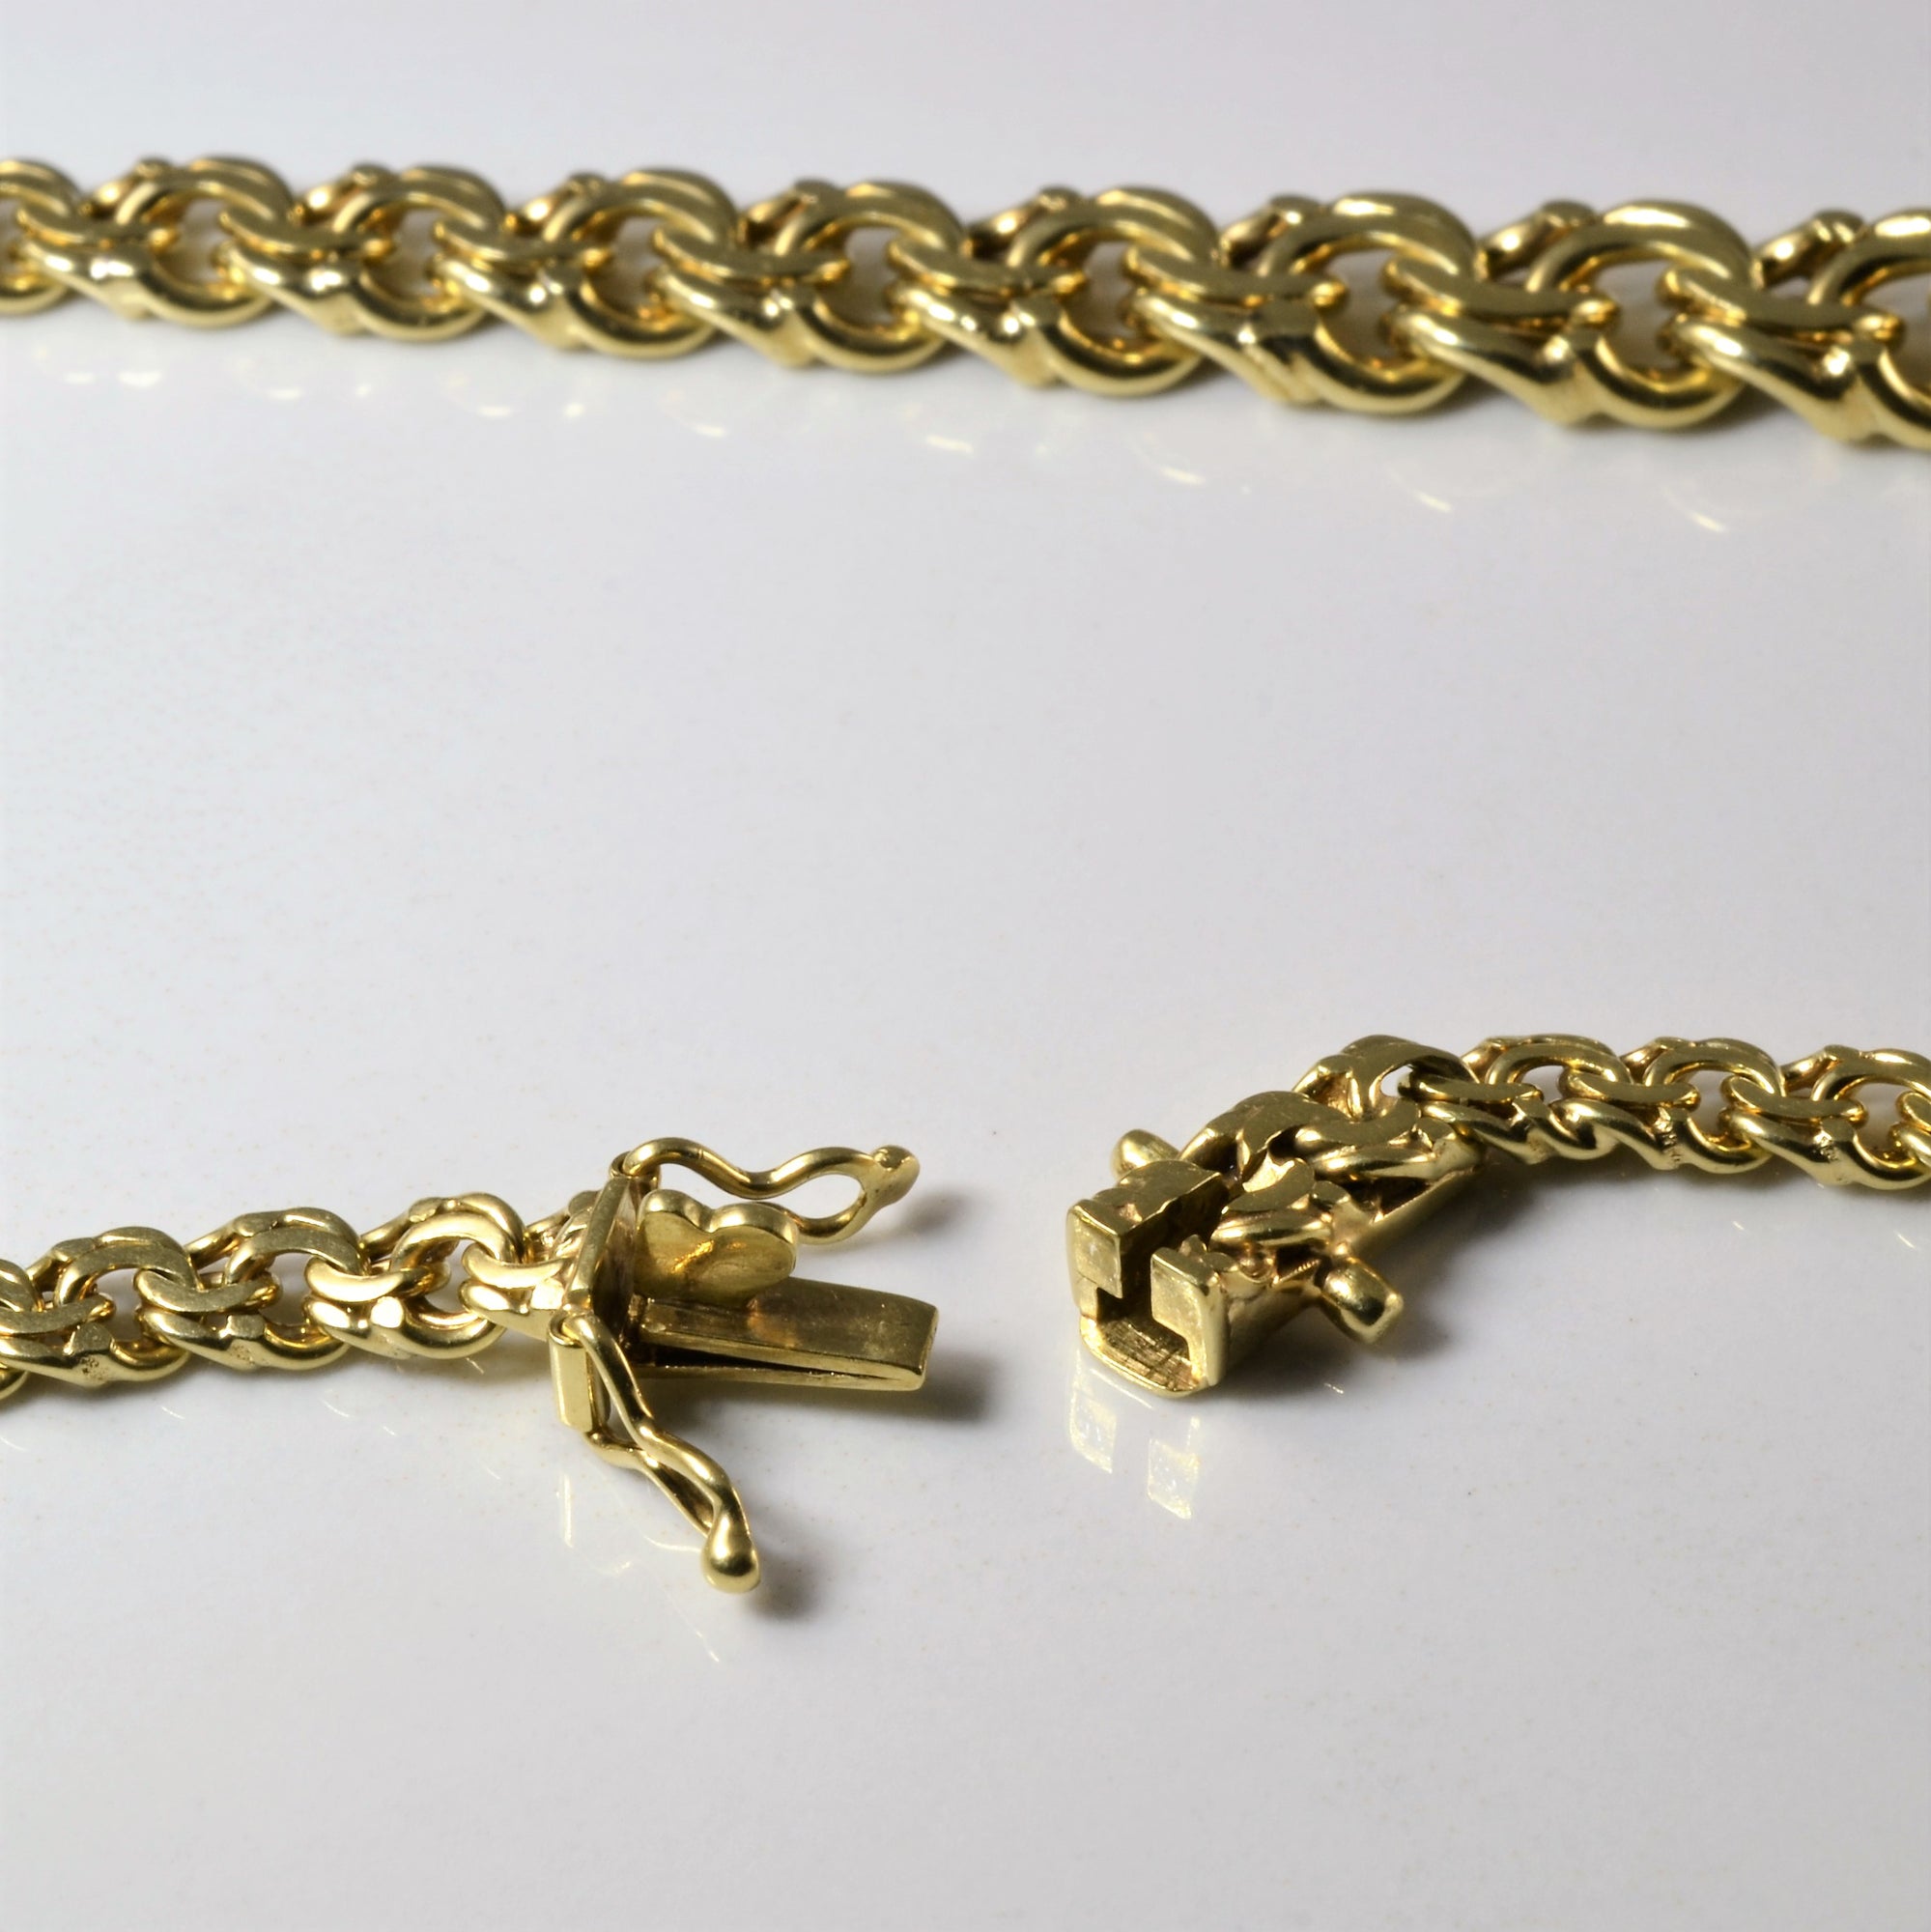 14k Tapered Kings Braid Chain Necklace | 18.5